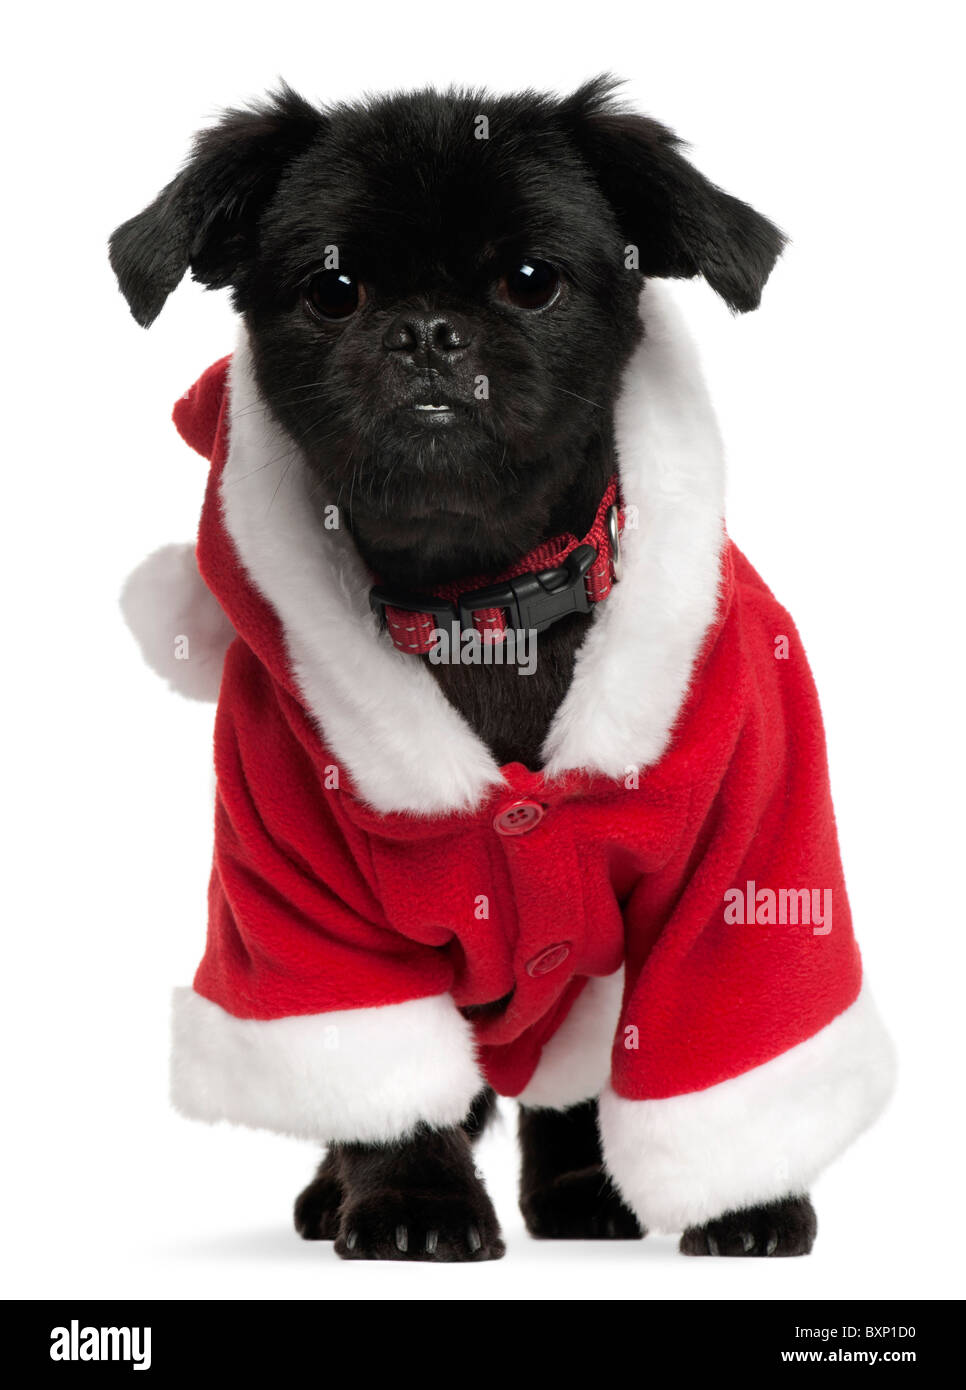 Mixed-breed dog wearing Santa outfit, 11 years old, in front of white background Stock Photo